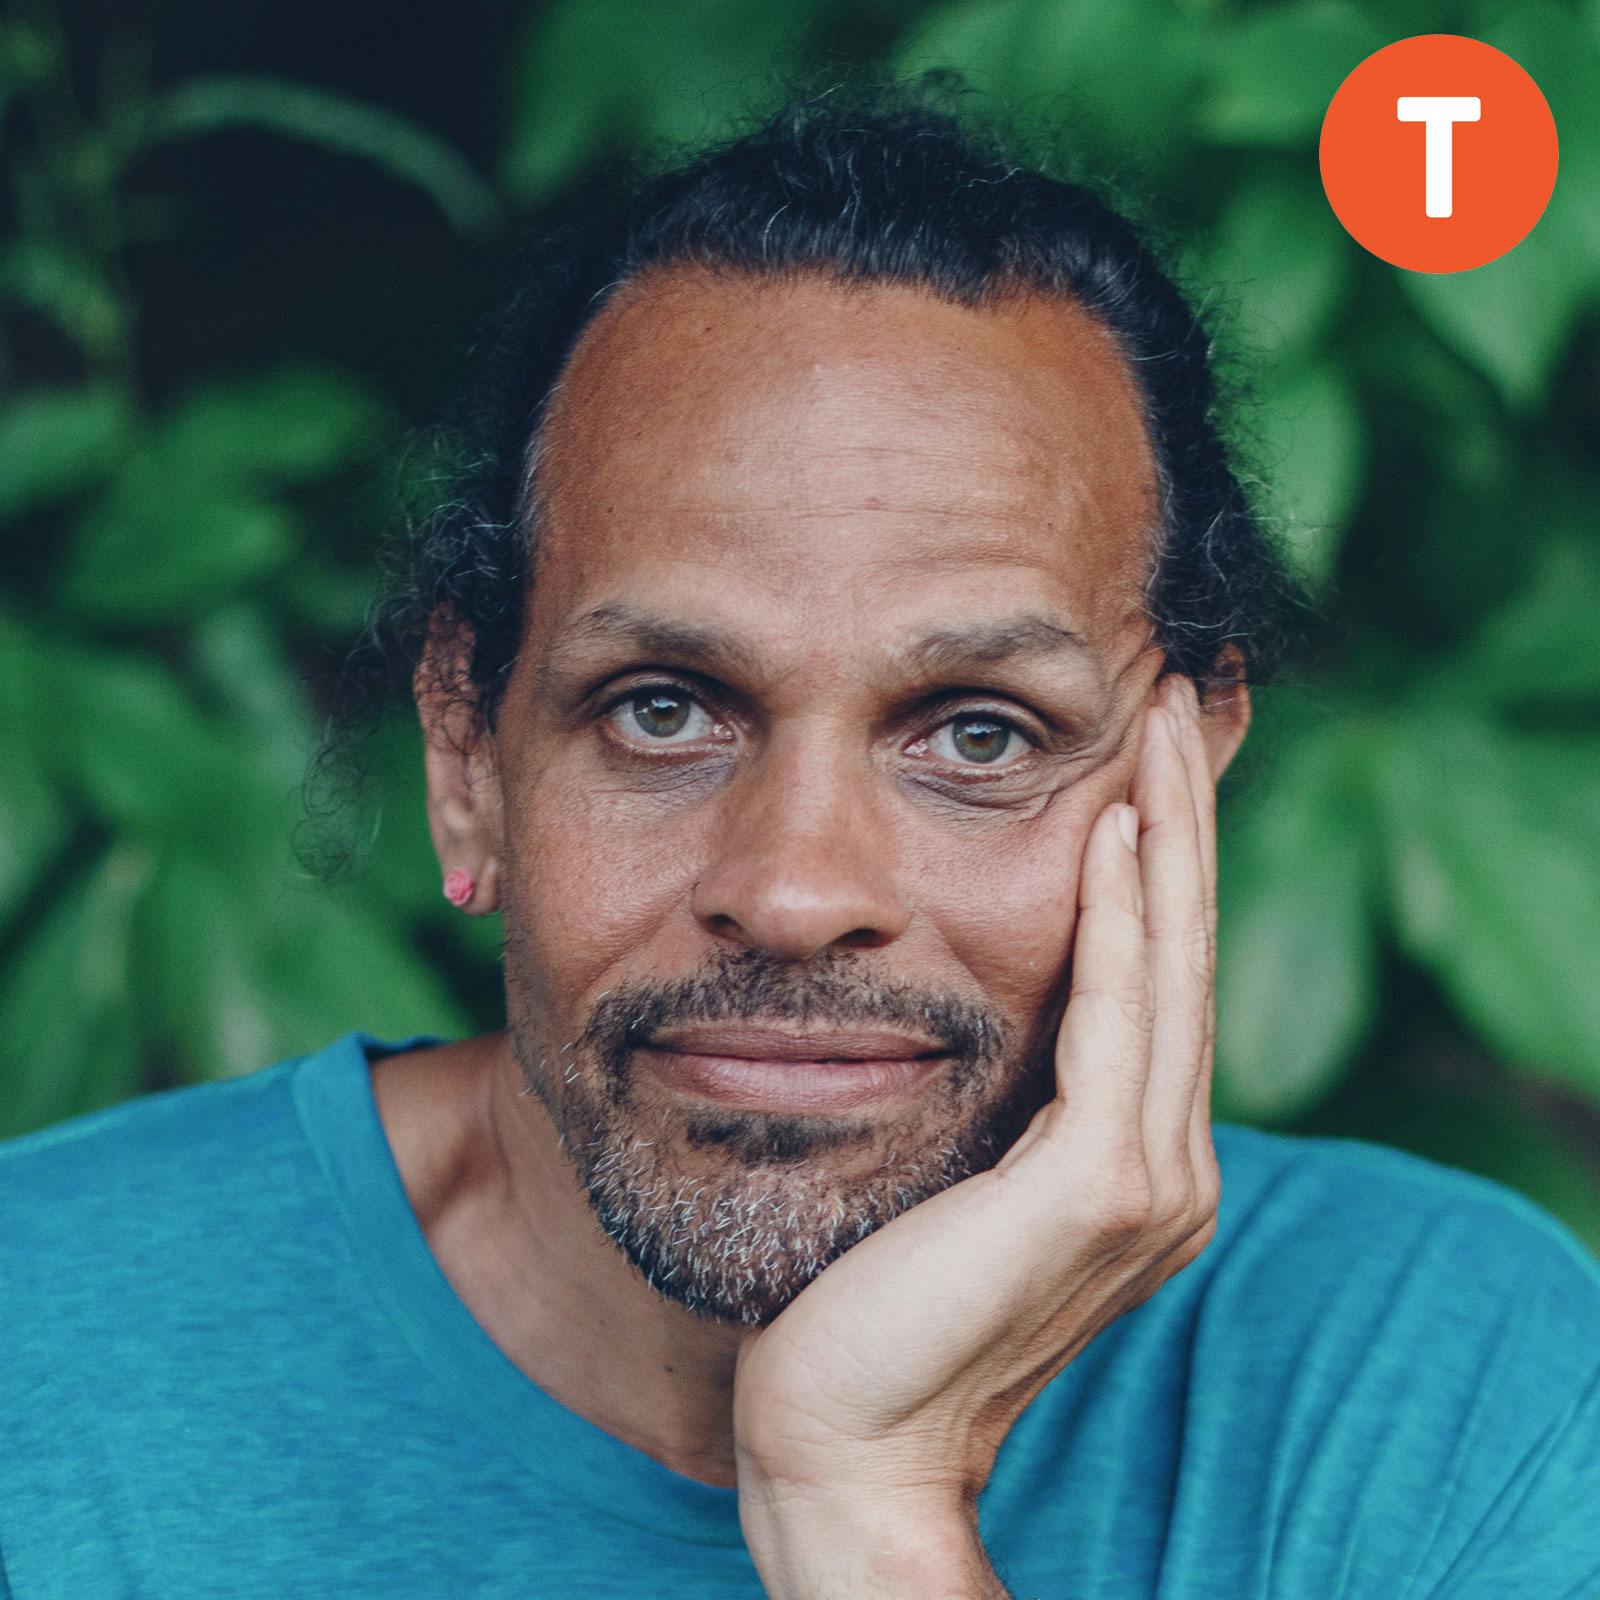 Attending to the Fullness of Life with Ross Gay